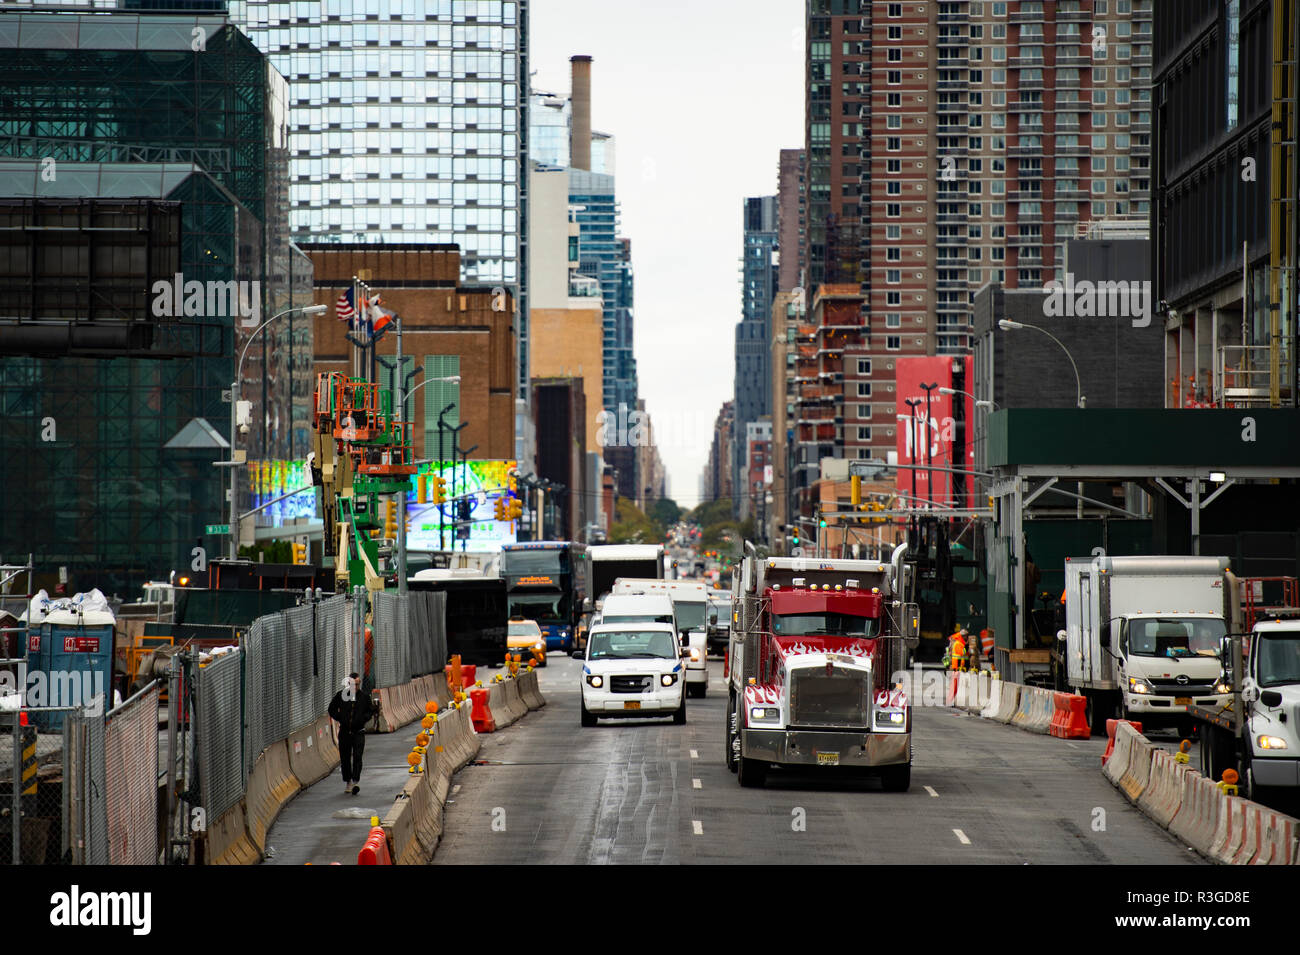 Traffic jam in Times Square during a cloudy day. Times Square is a major tourist destination in New York. Stock Photo